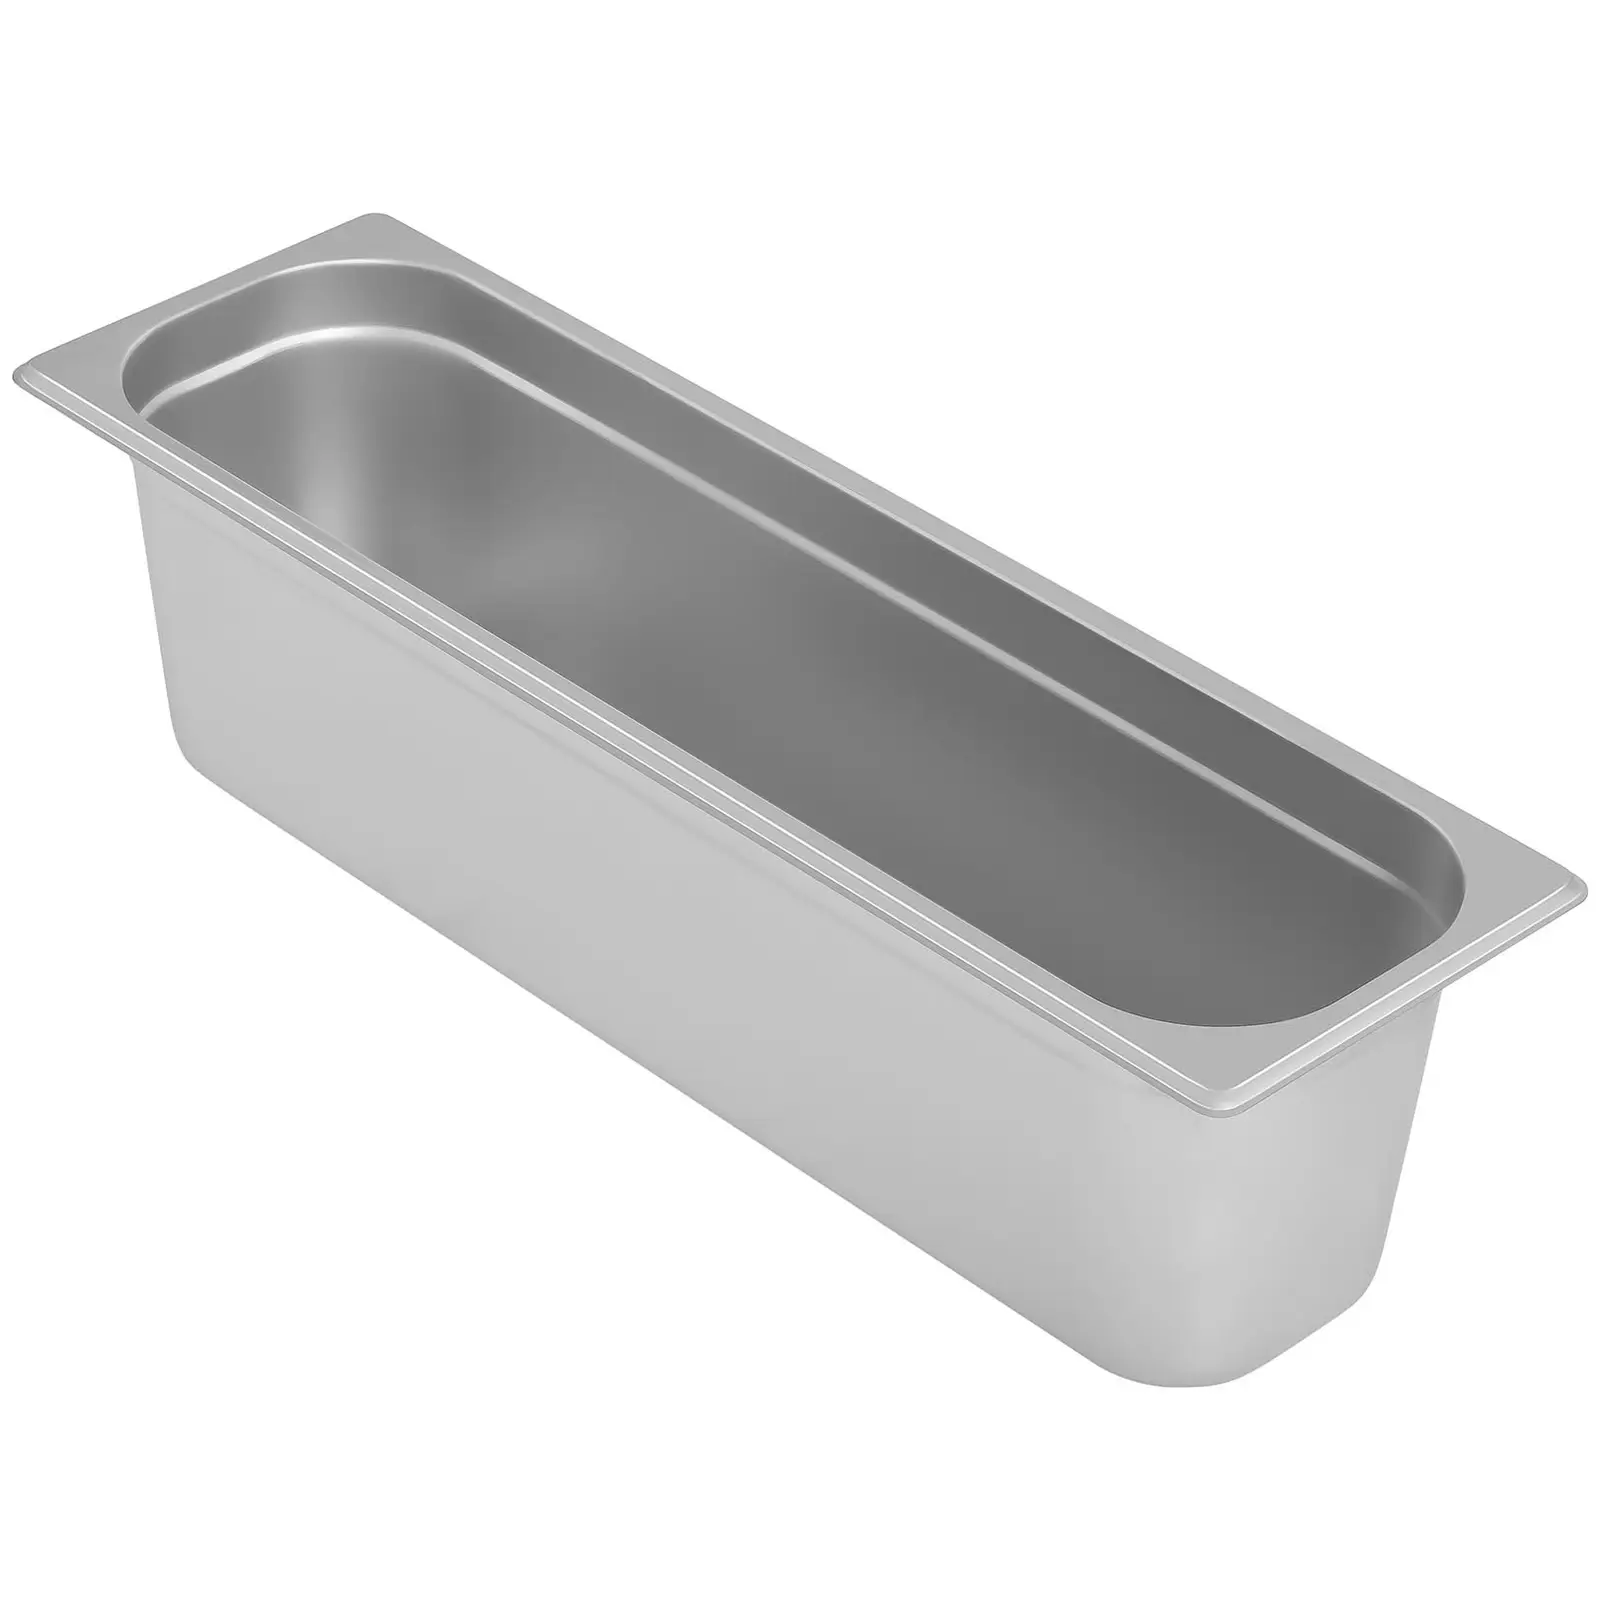 Gastronorm Tray - 2/4 - 150 mm